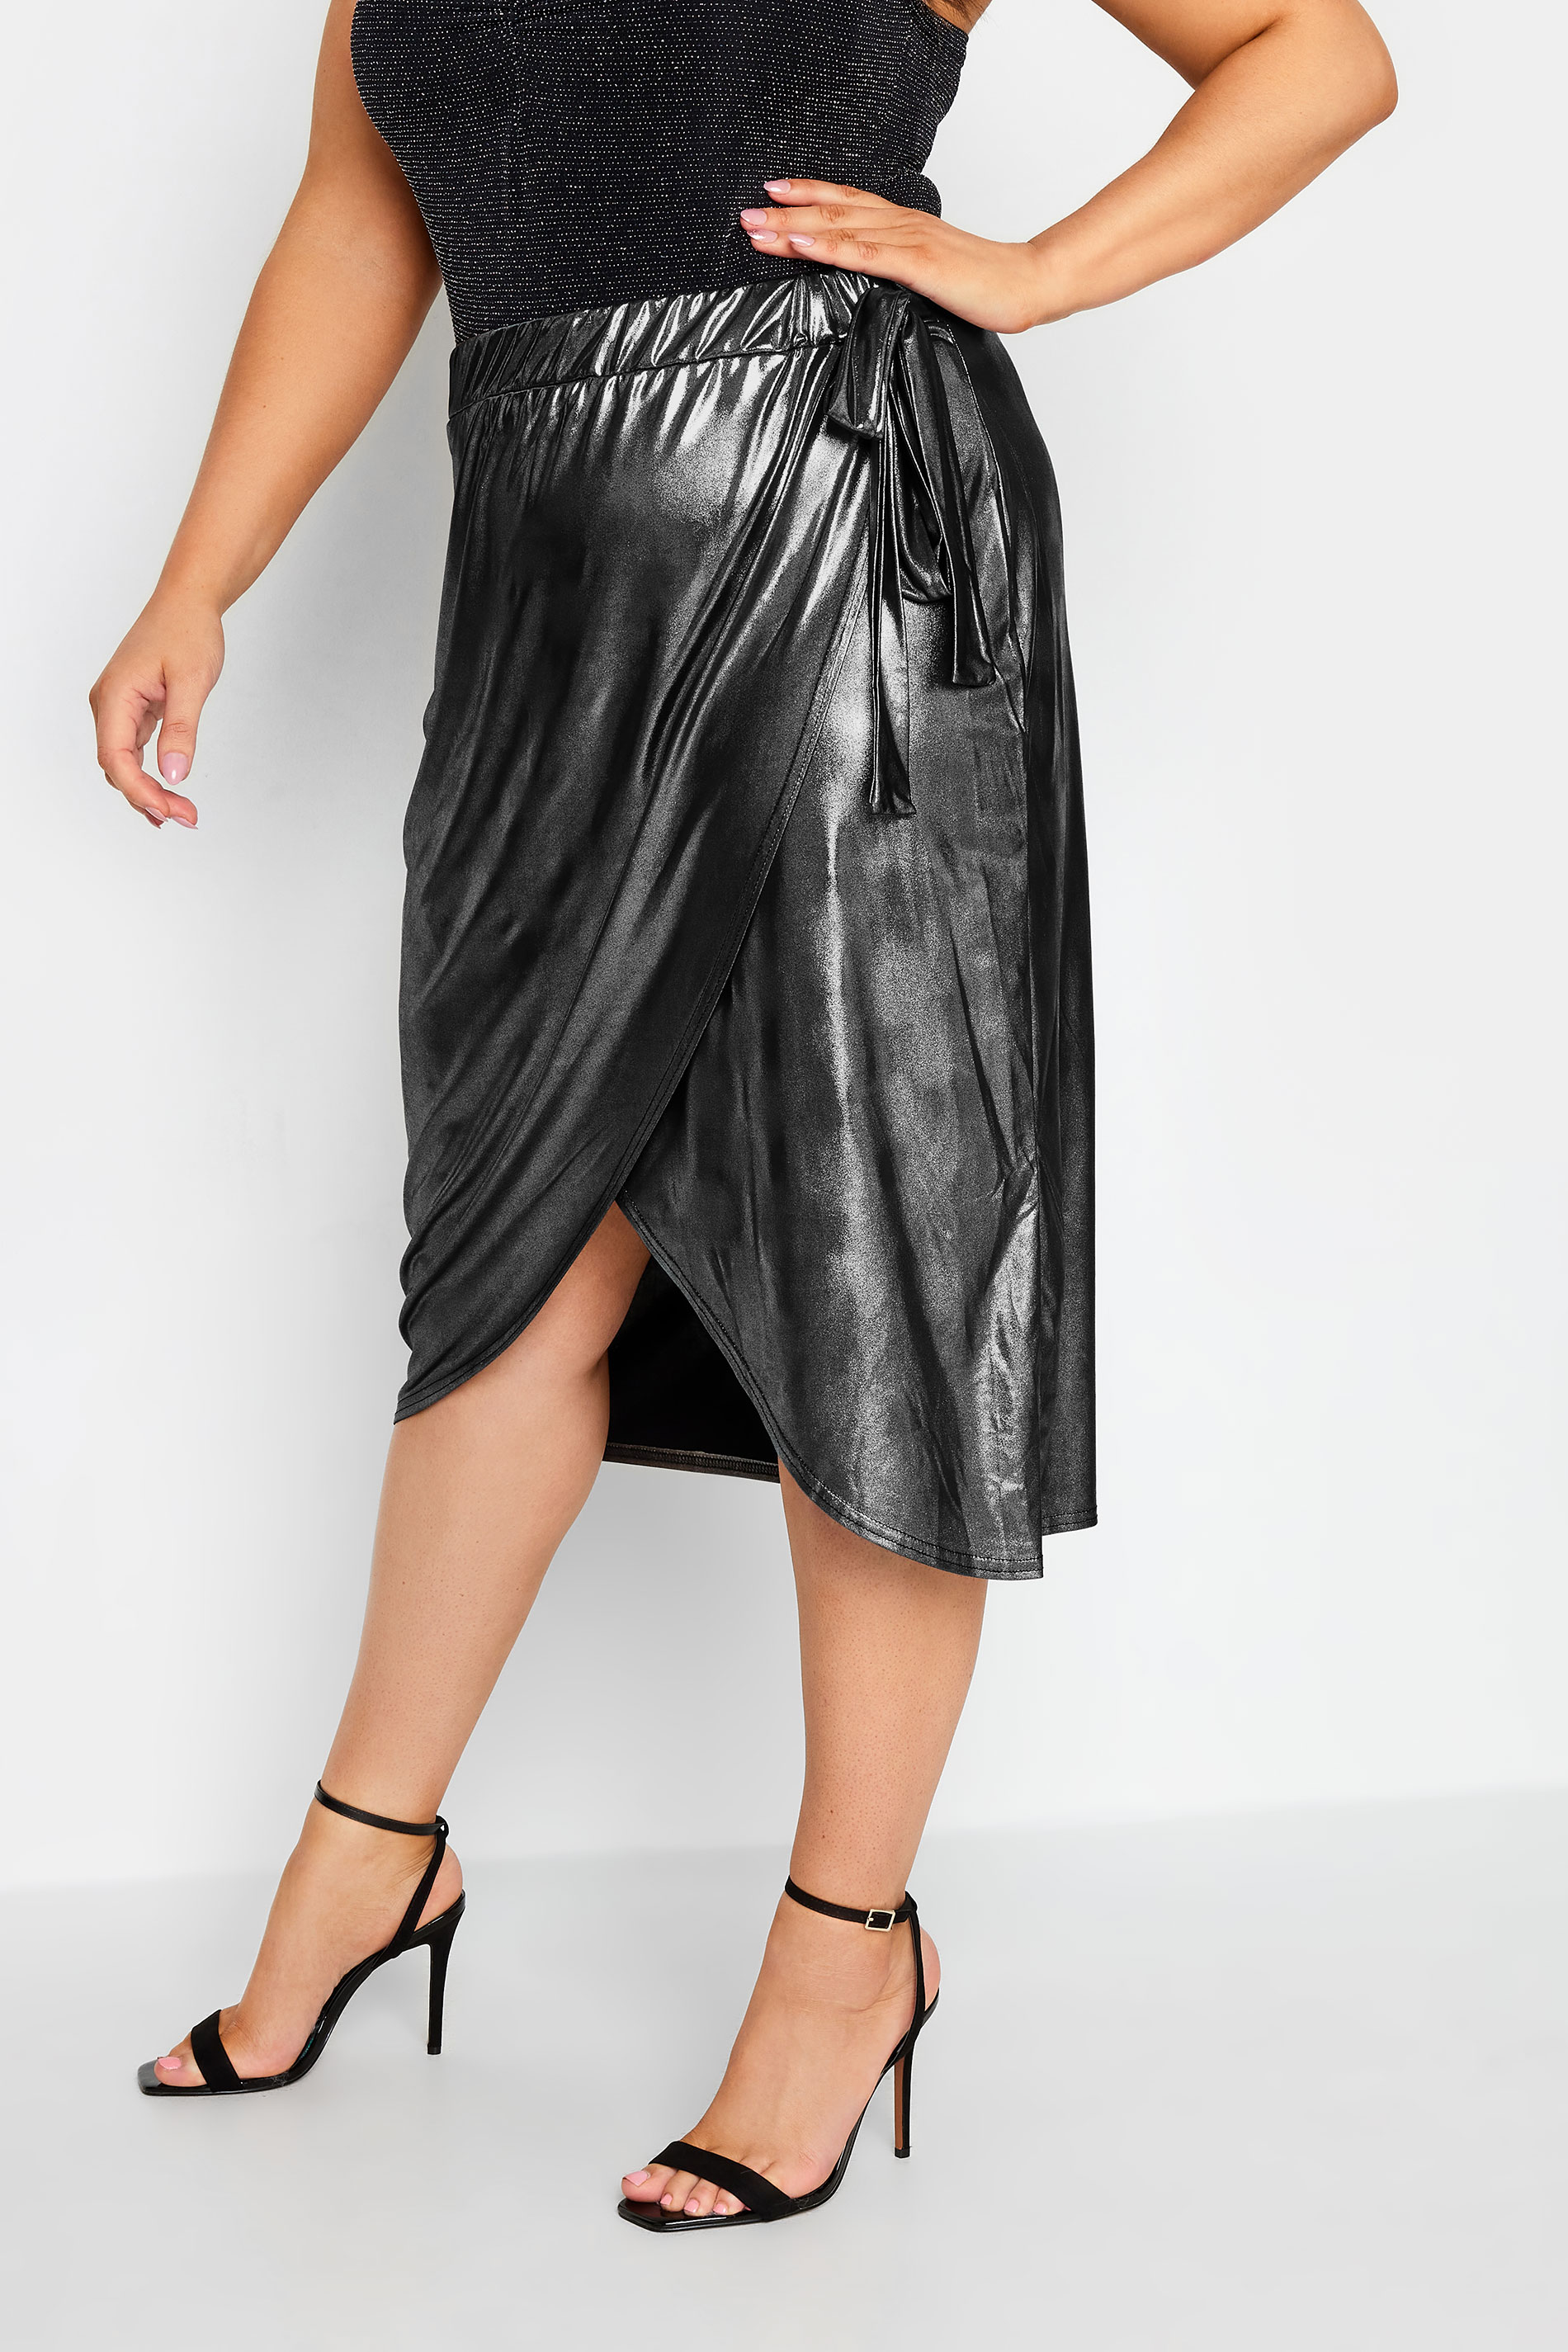 LIMITED COLLECTION Plus Size Silver Foil Wrap Skirt | Yours Clothing